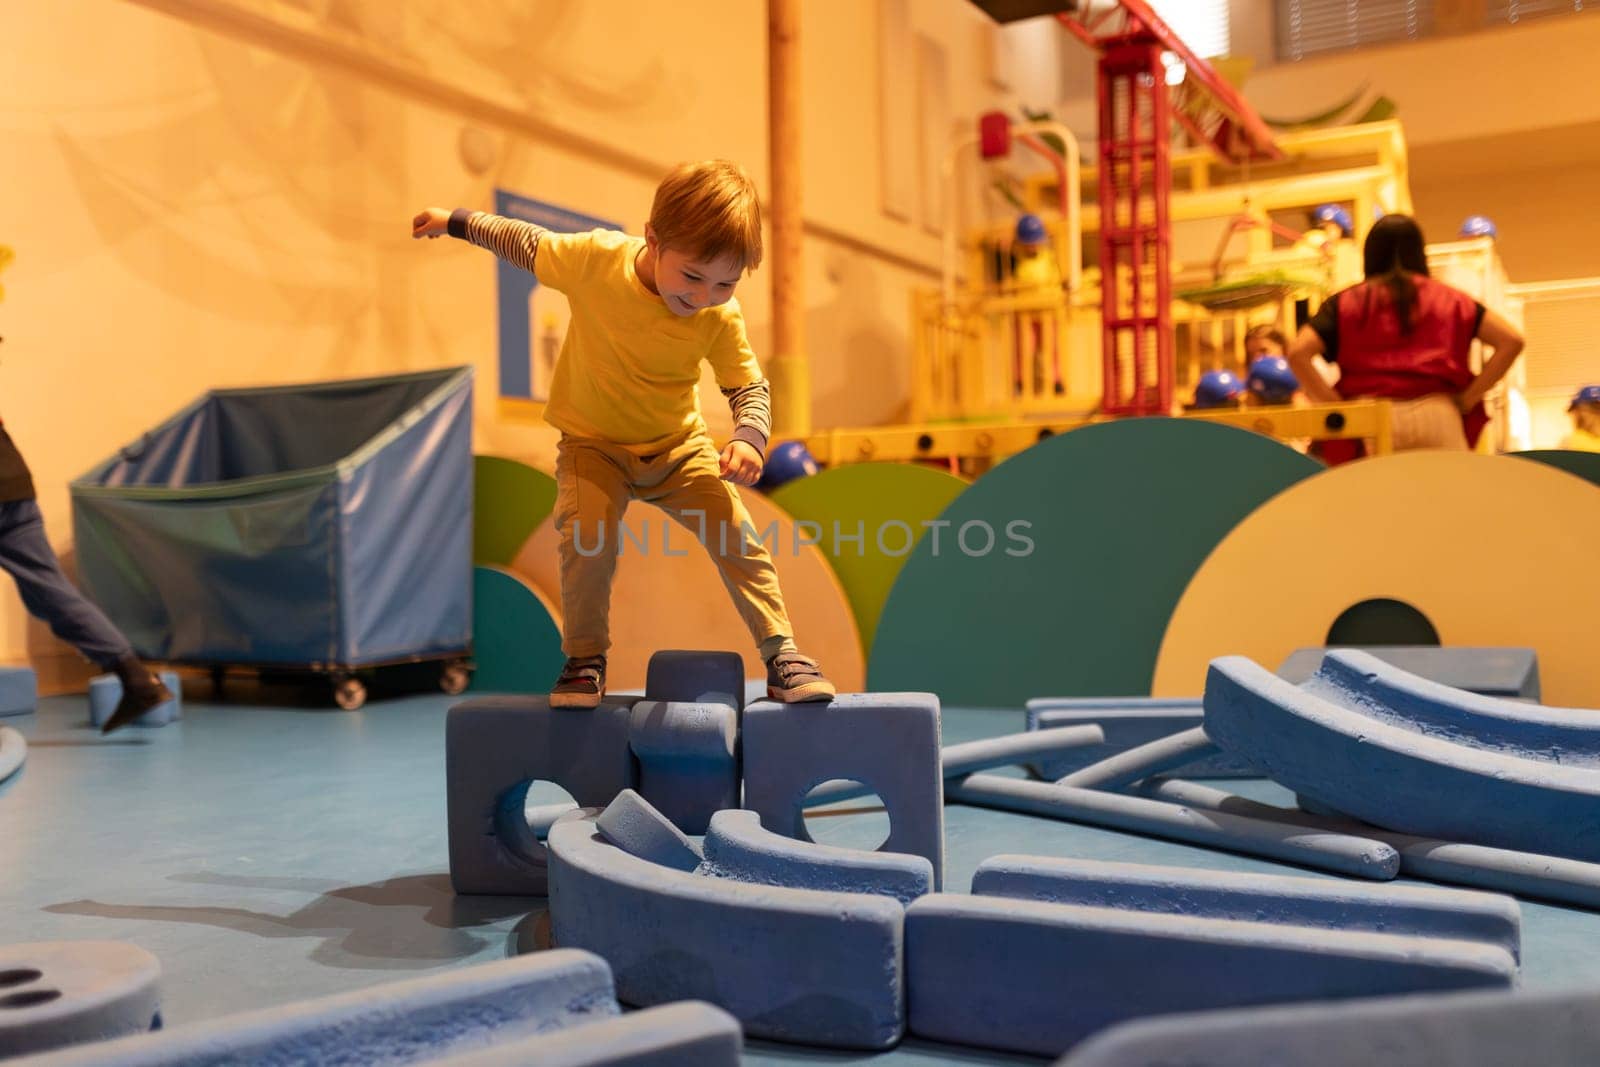 A young boy is playing with blocks in a room. The blocks are blue and the boy is standing on them. There are other people in the room, but they are not the main focus of the image